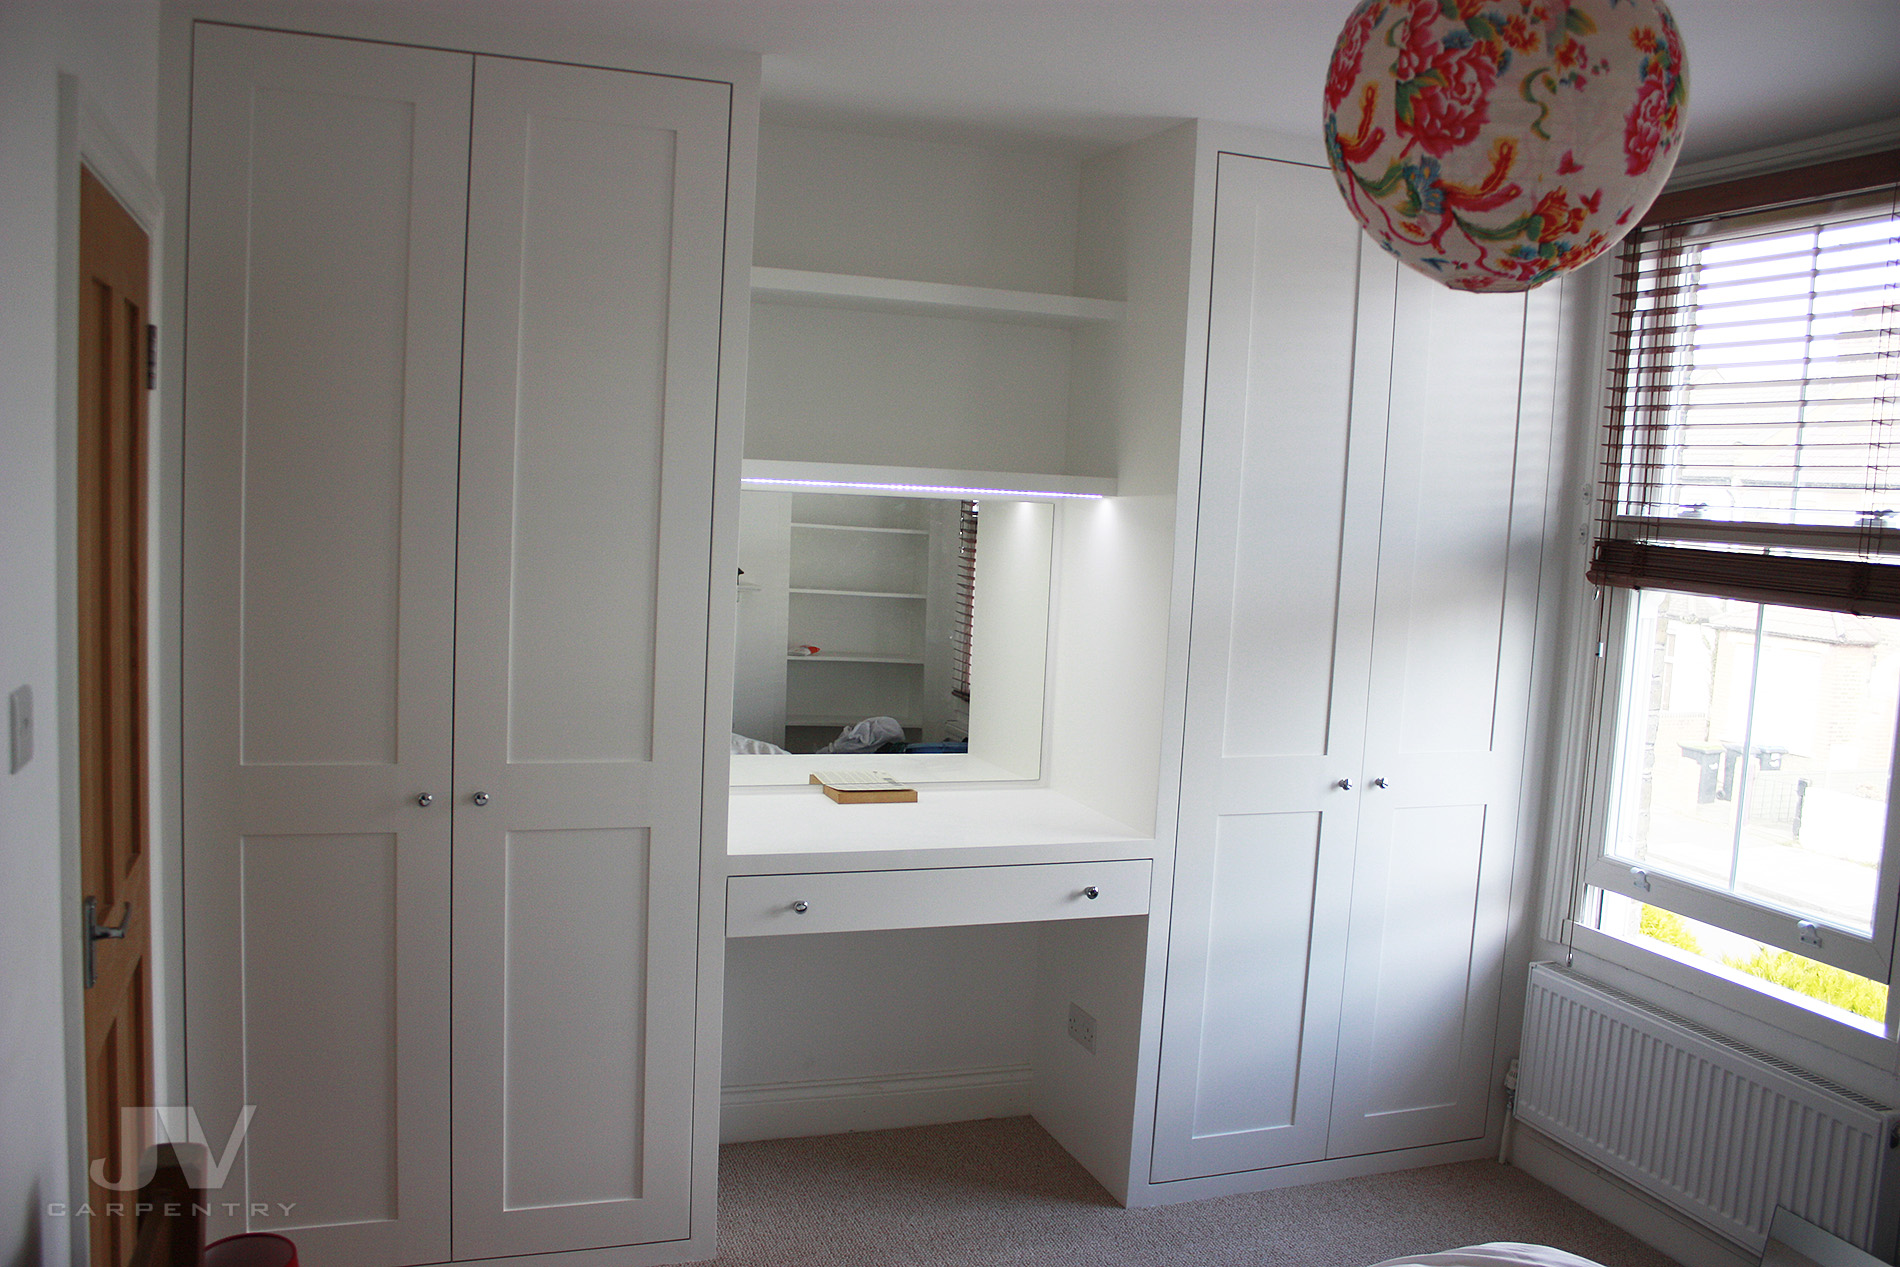 Dressing table fitted between two wardrobes